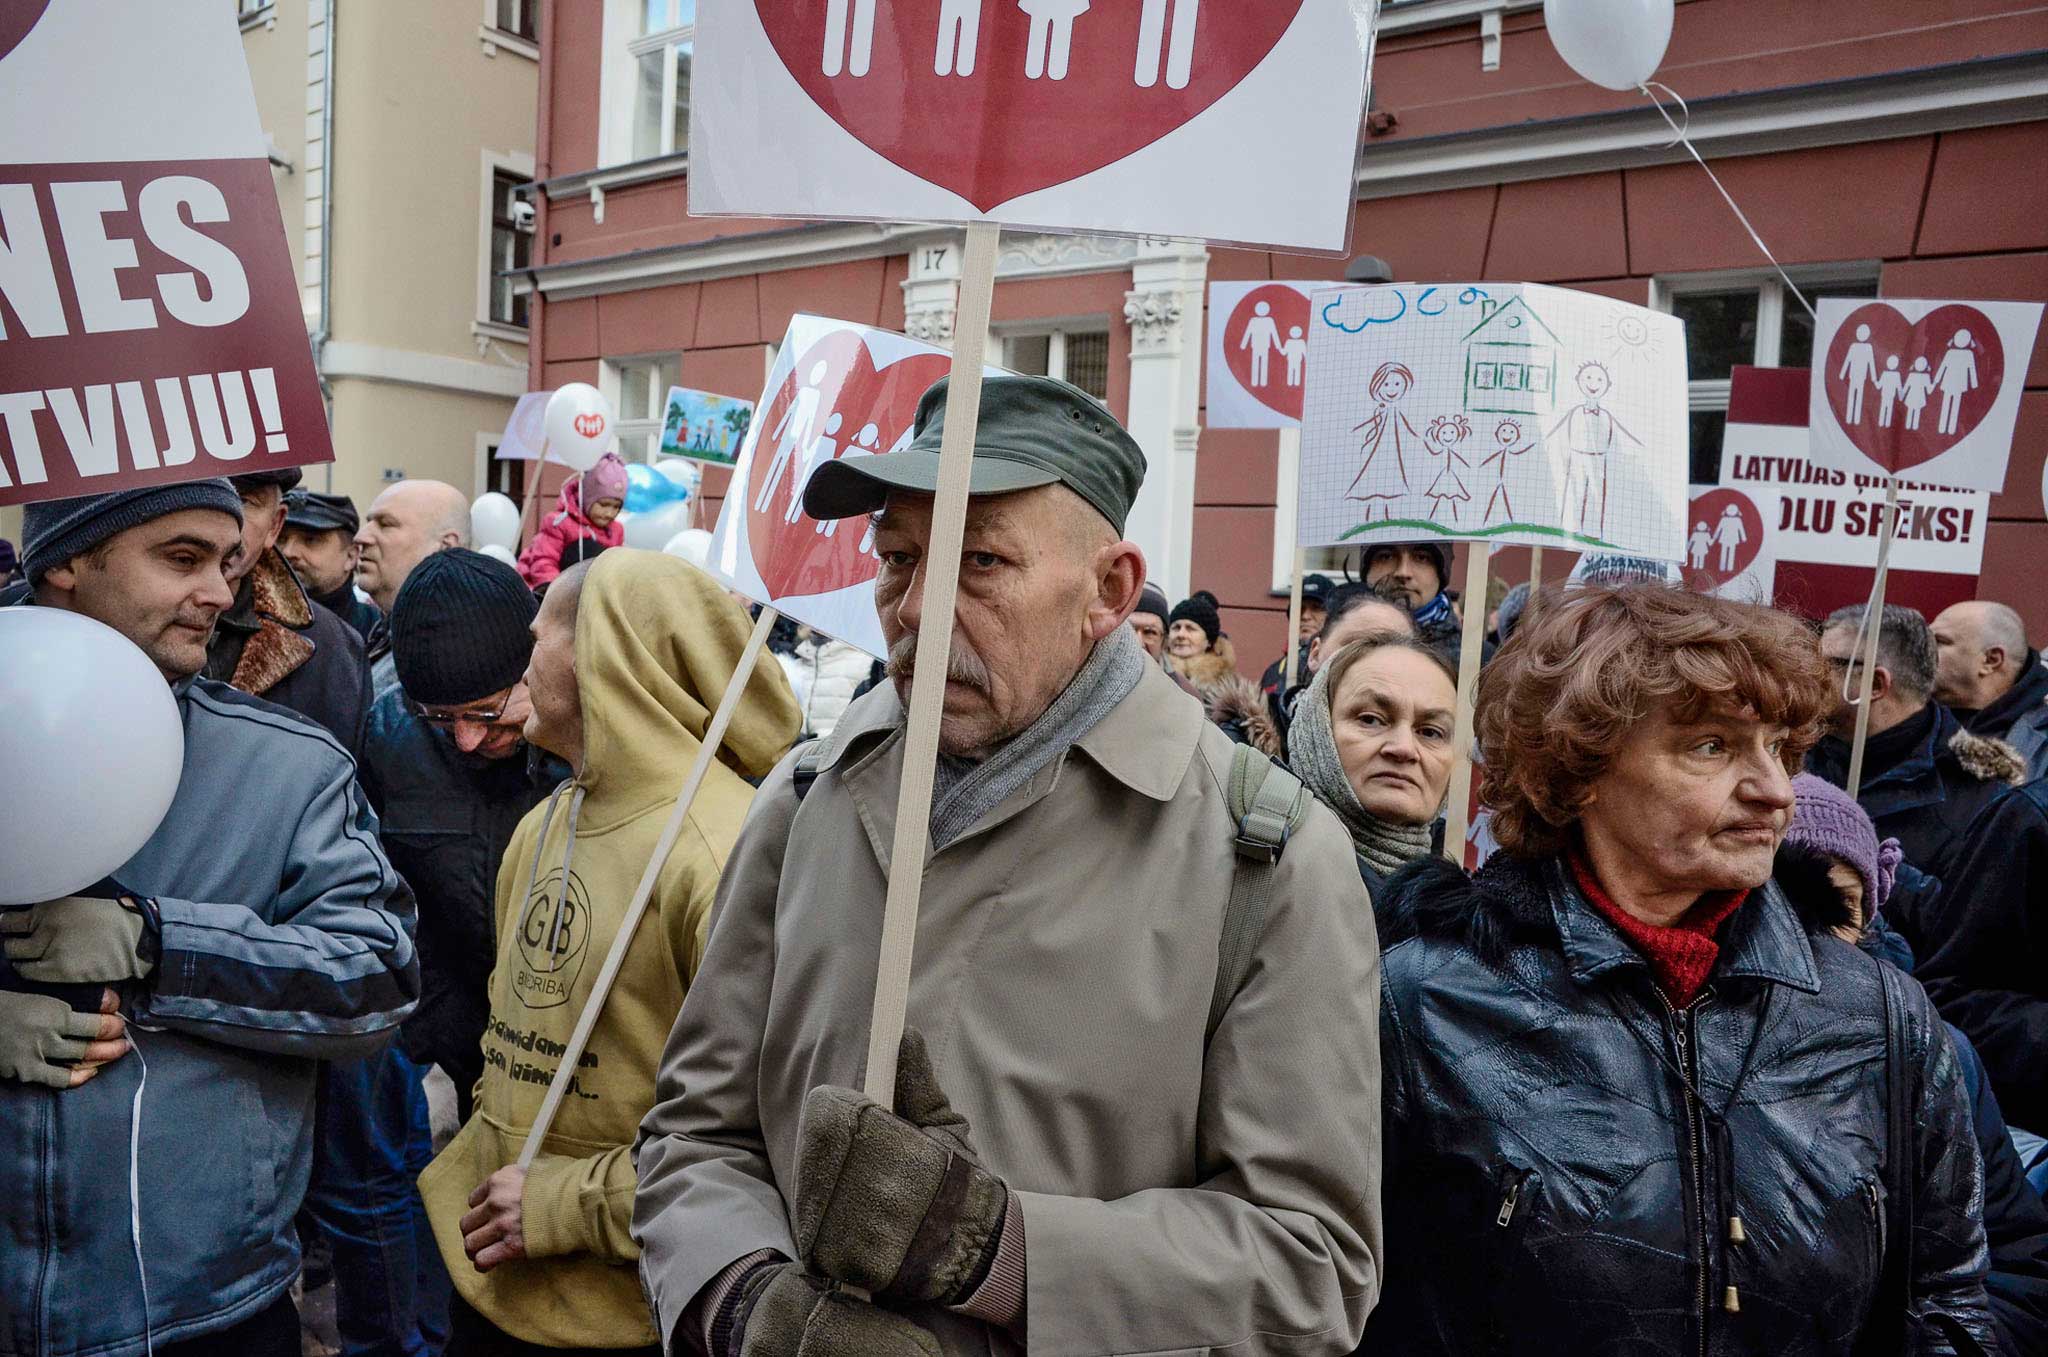 Conservative Protesters march in Riga, Latvia in support of traditional families, October 25th, 2014. Many in the group believe that homosexuality did not exist in Latvia before they joined the European Union.